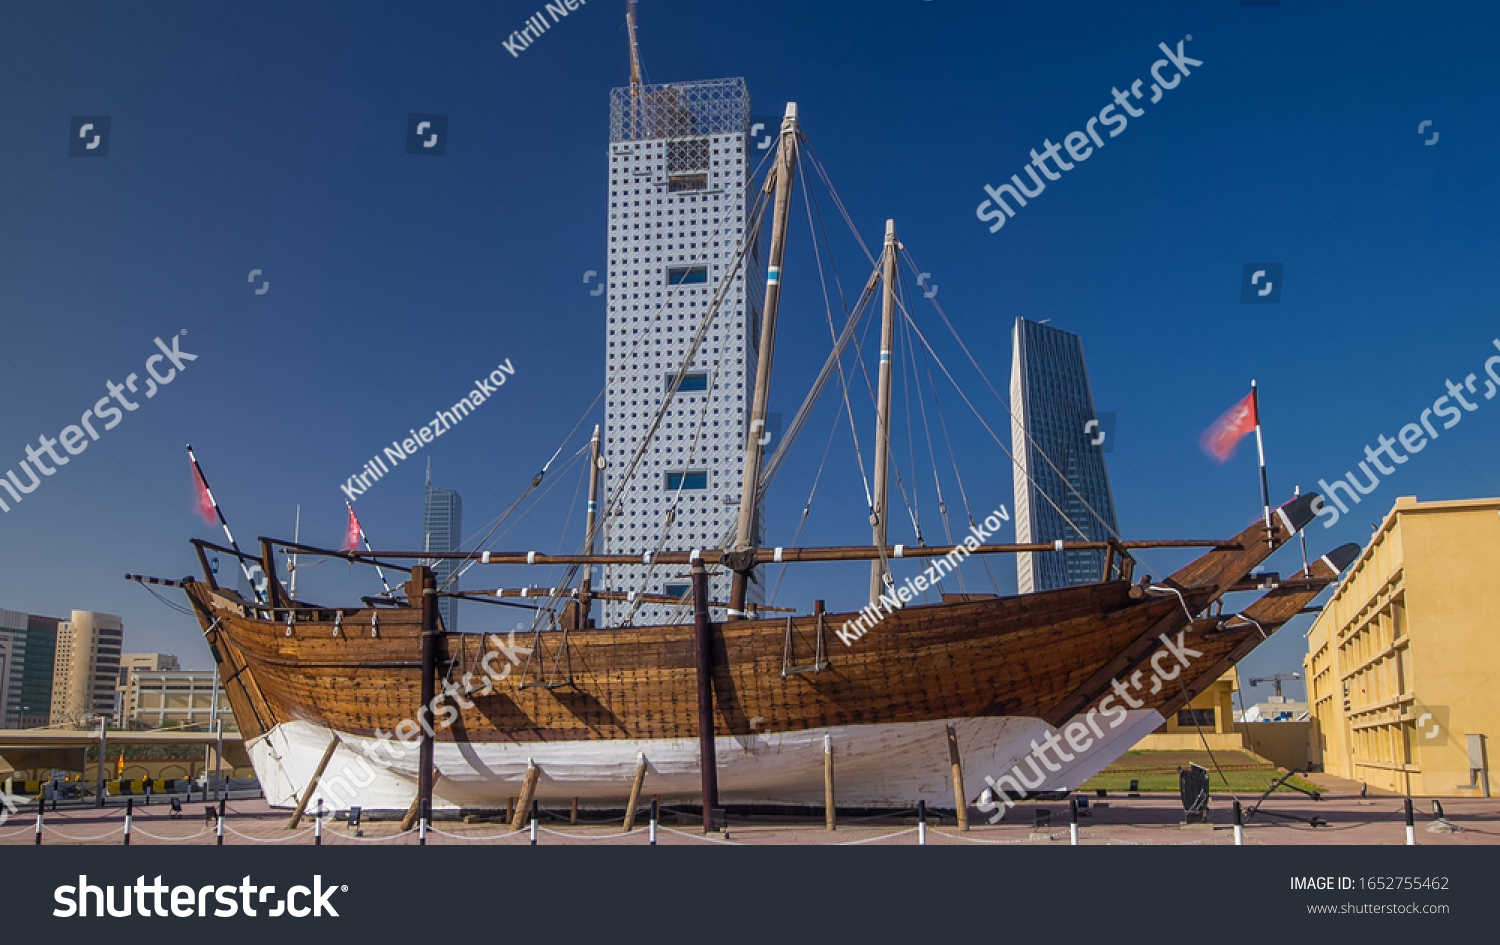 Historic dhow ships view at the Maritime Museum of in Kuwait. Kuwait, Middle East. Skyscrapers on background with blue sky #1652755462